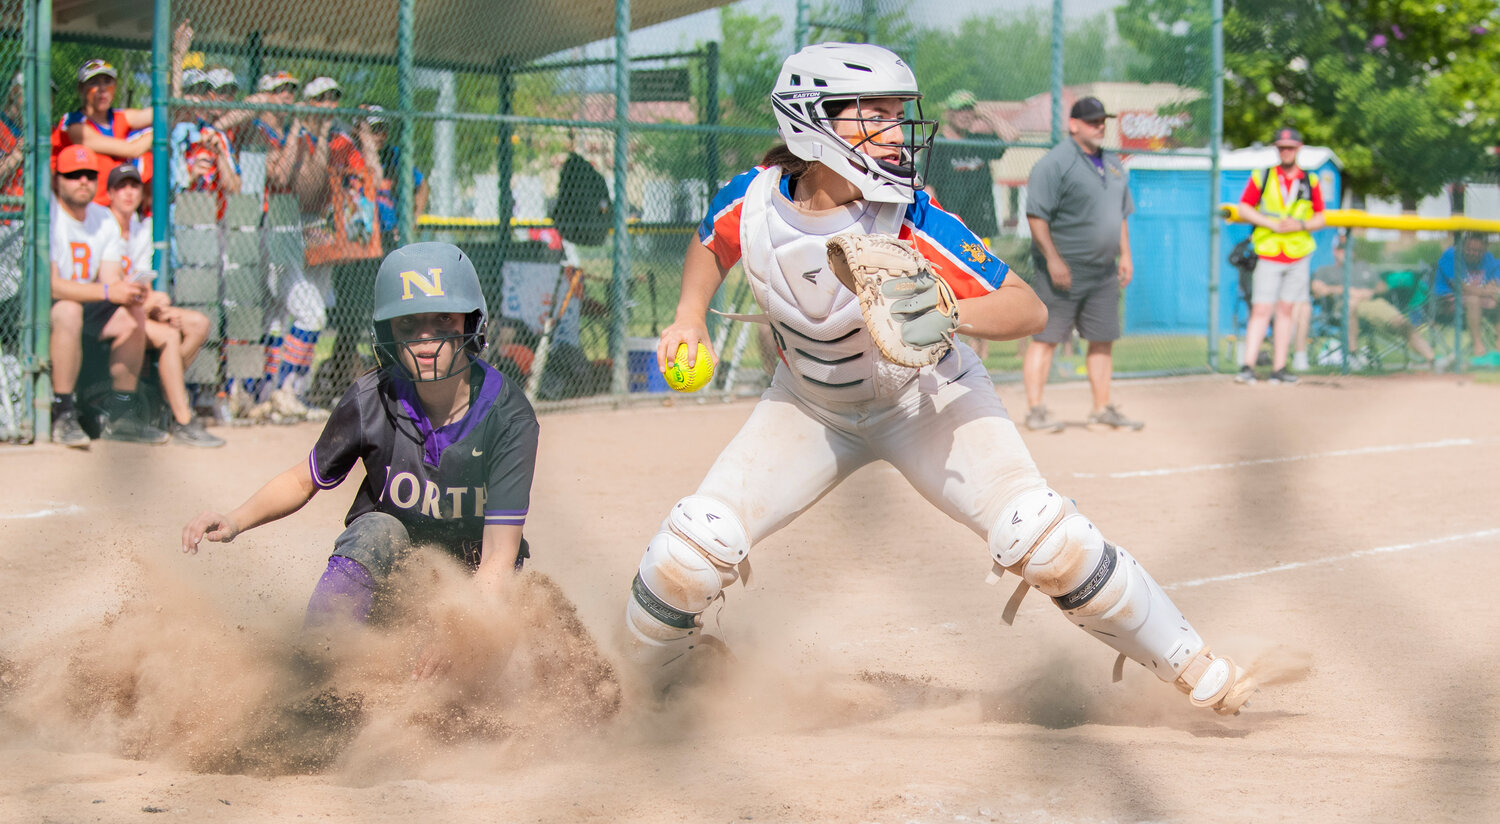 Ridgefield catcher Makayla Ferguson (13) completes a force out at home plate during a state title game against North Kitsap at Carlon Park in Selah on Saturday, May 27.